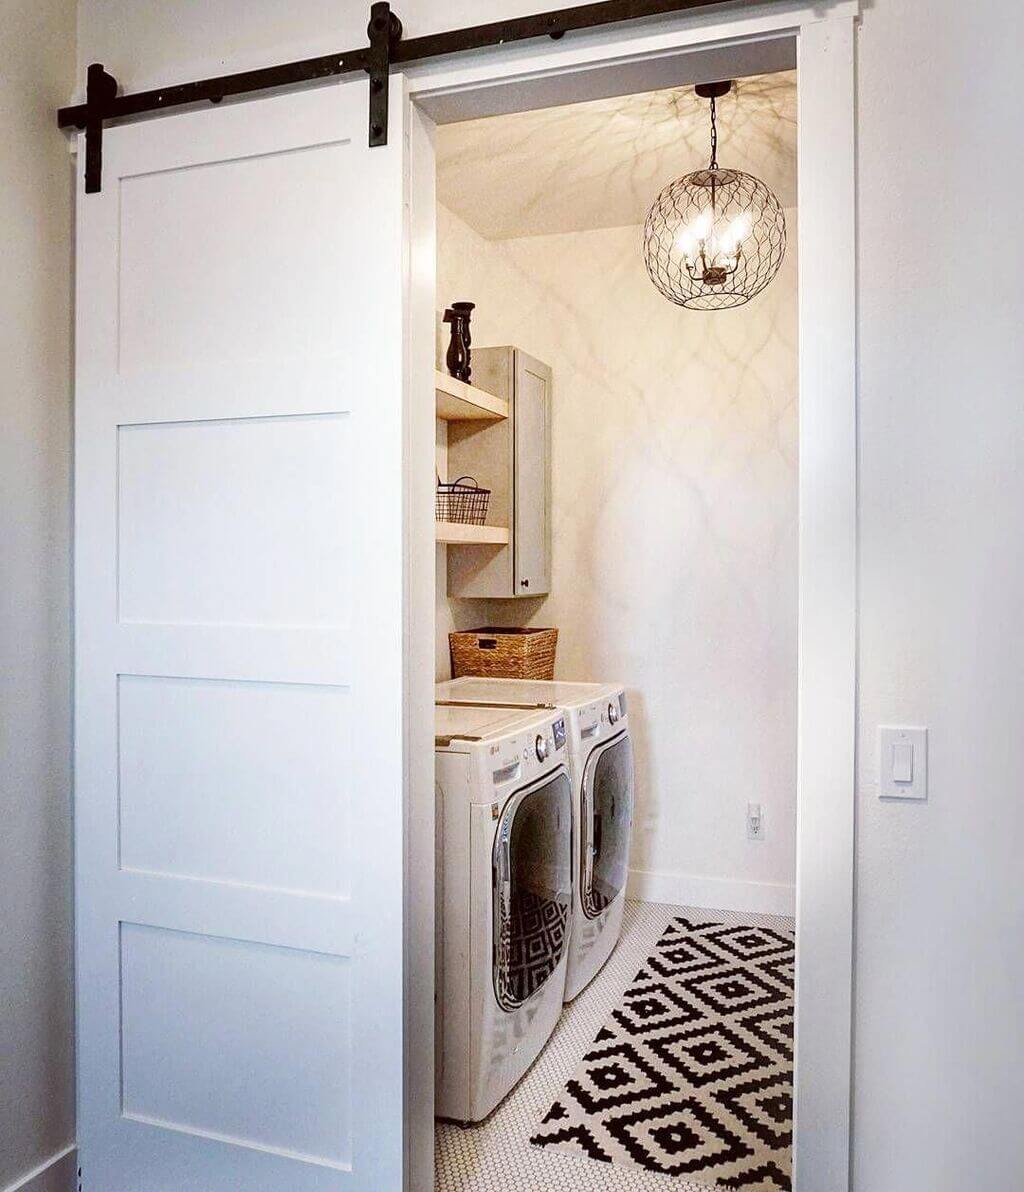 Make Use of Doors of laundry room